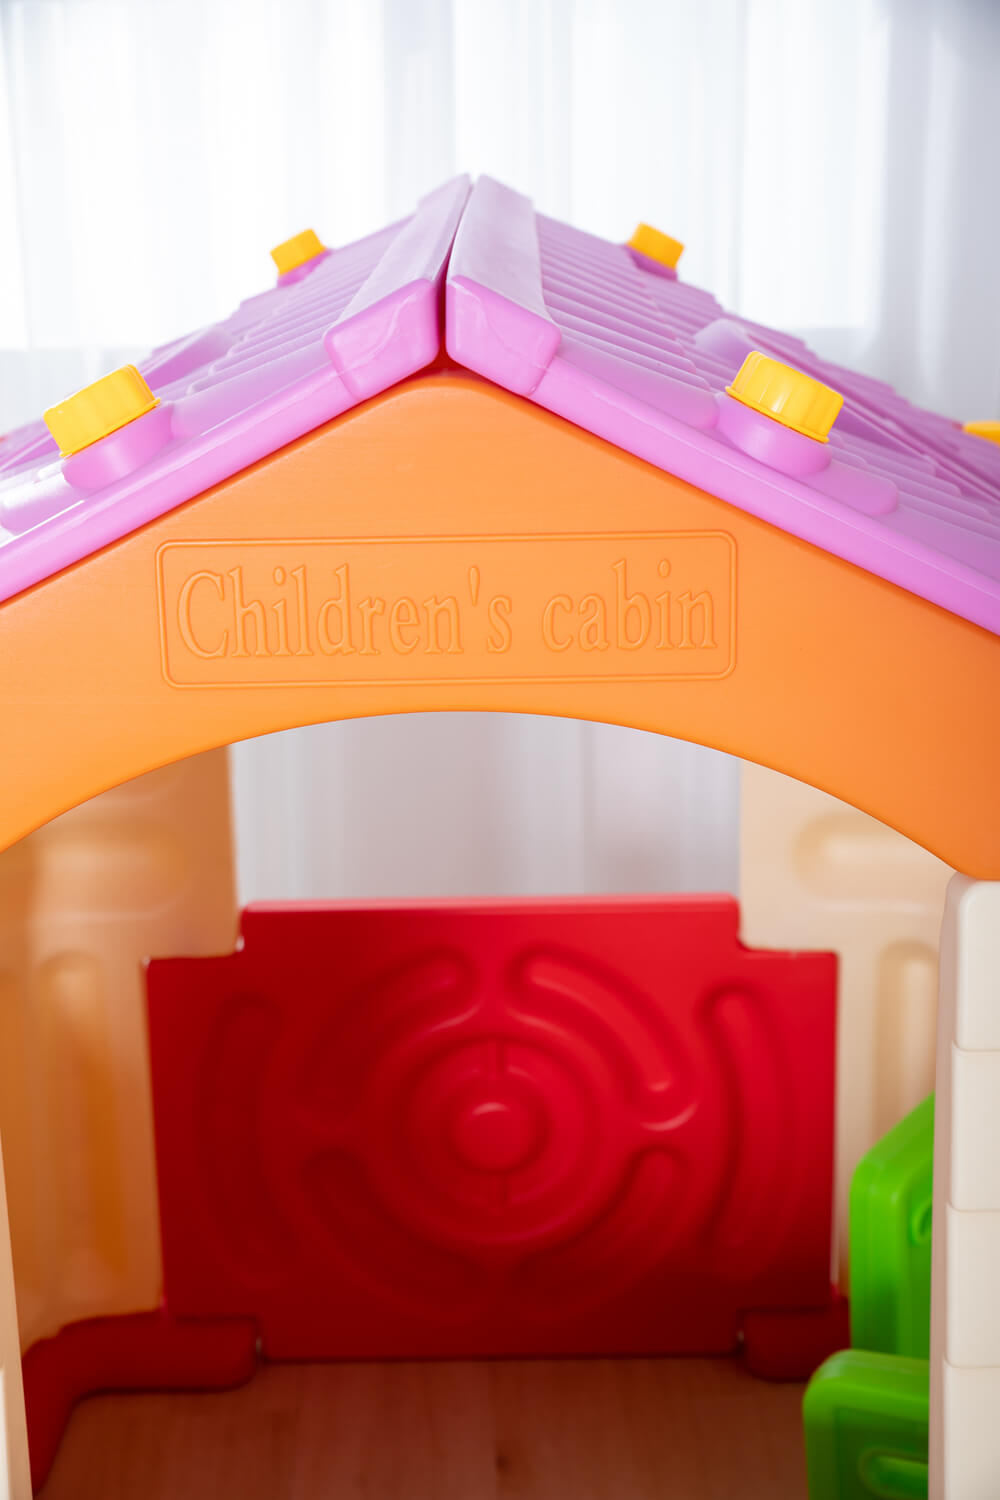 fun Play House Children's Toy Cabin